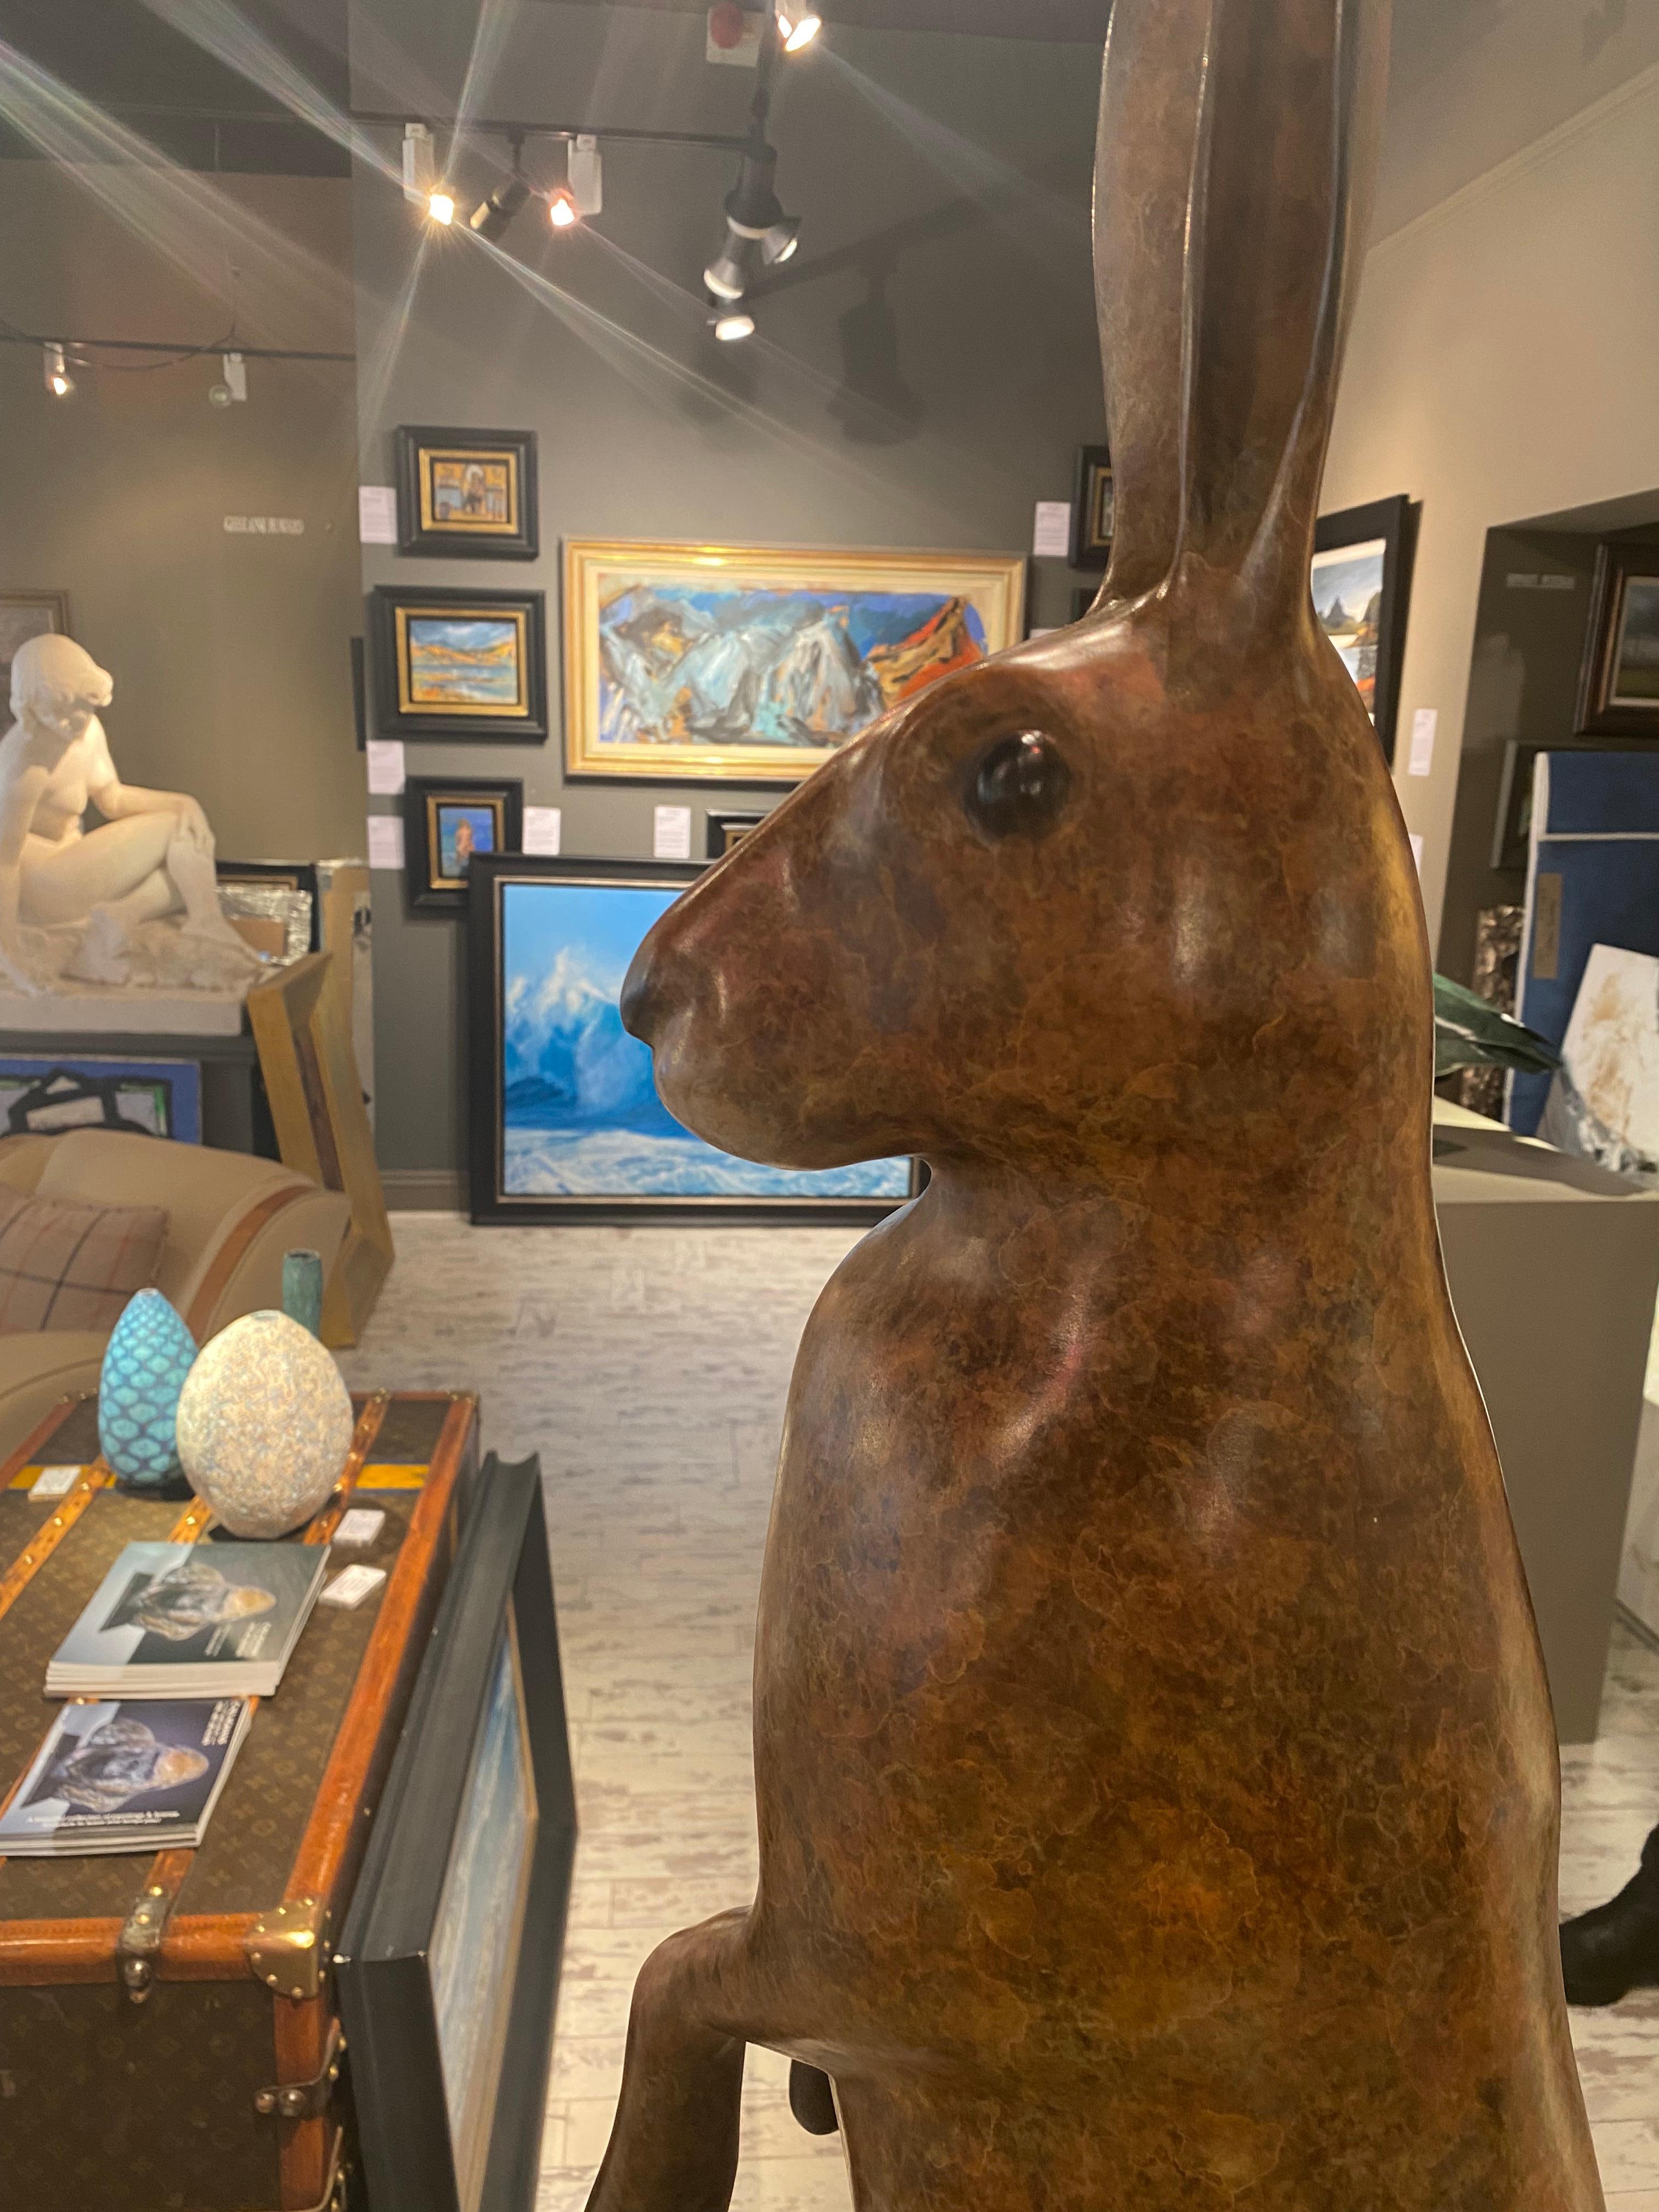 Alert Hare' is a  Bronze sculpture with a stunning life like qualities. Being a unique large piece,  Smith has captured every last detail and given this wonderful sculpture life. A standout piece that would look incredible in an interior setting or